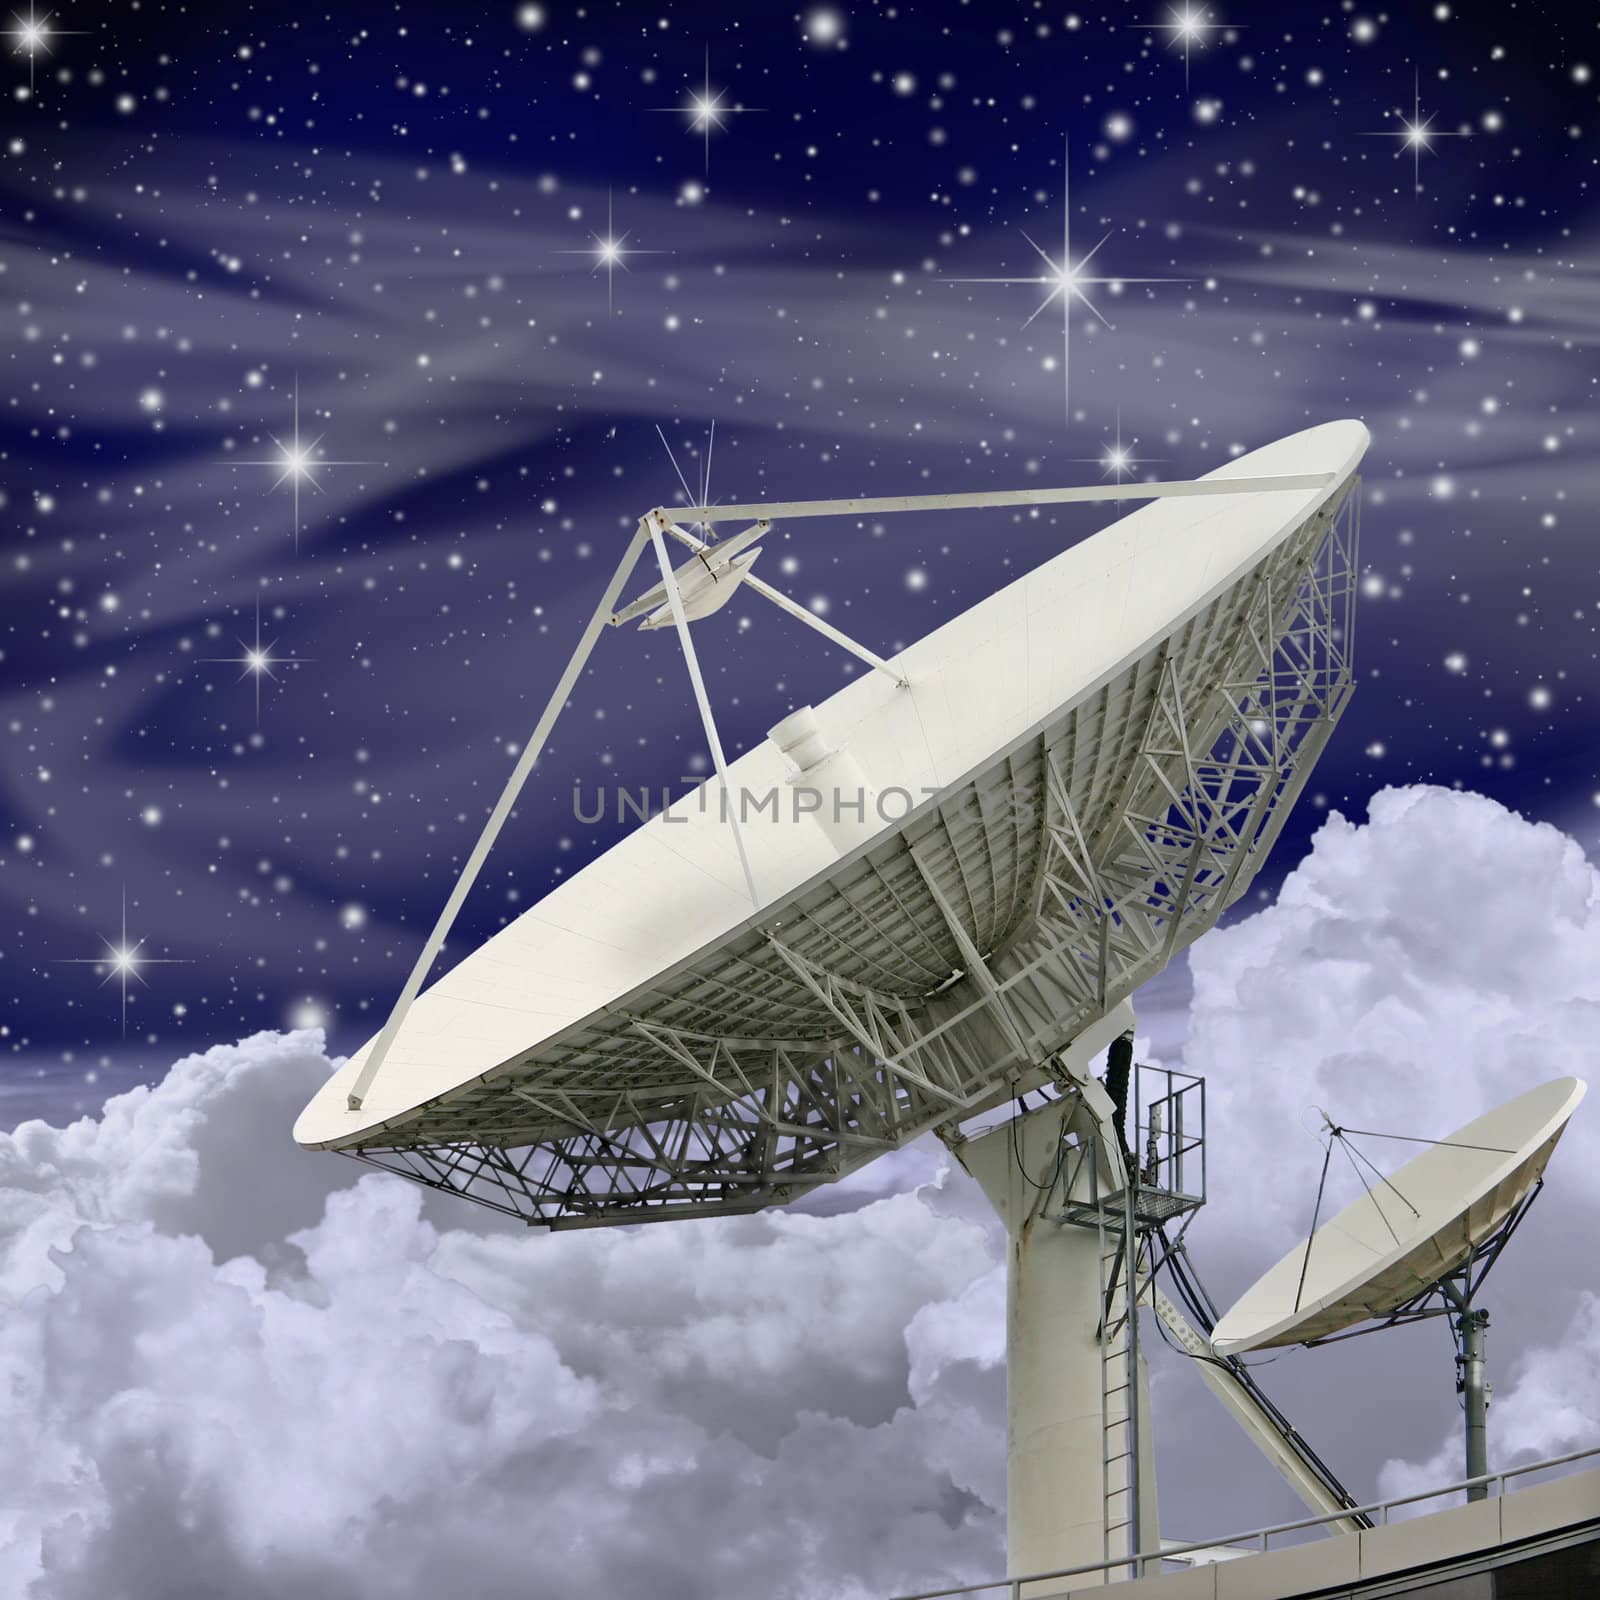 Large Satellite Dish with Clouds and Stars